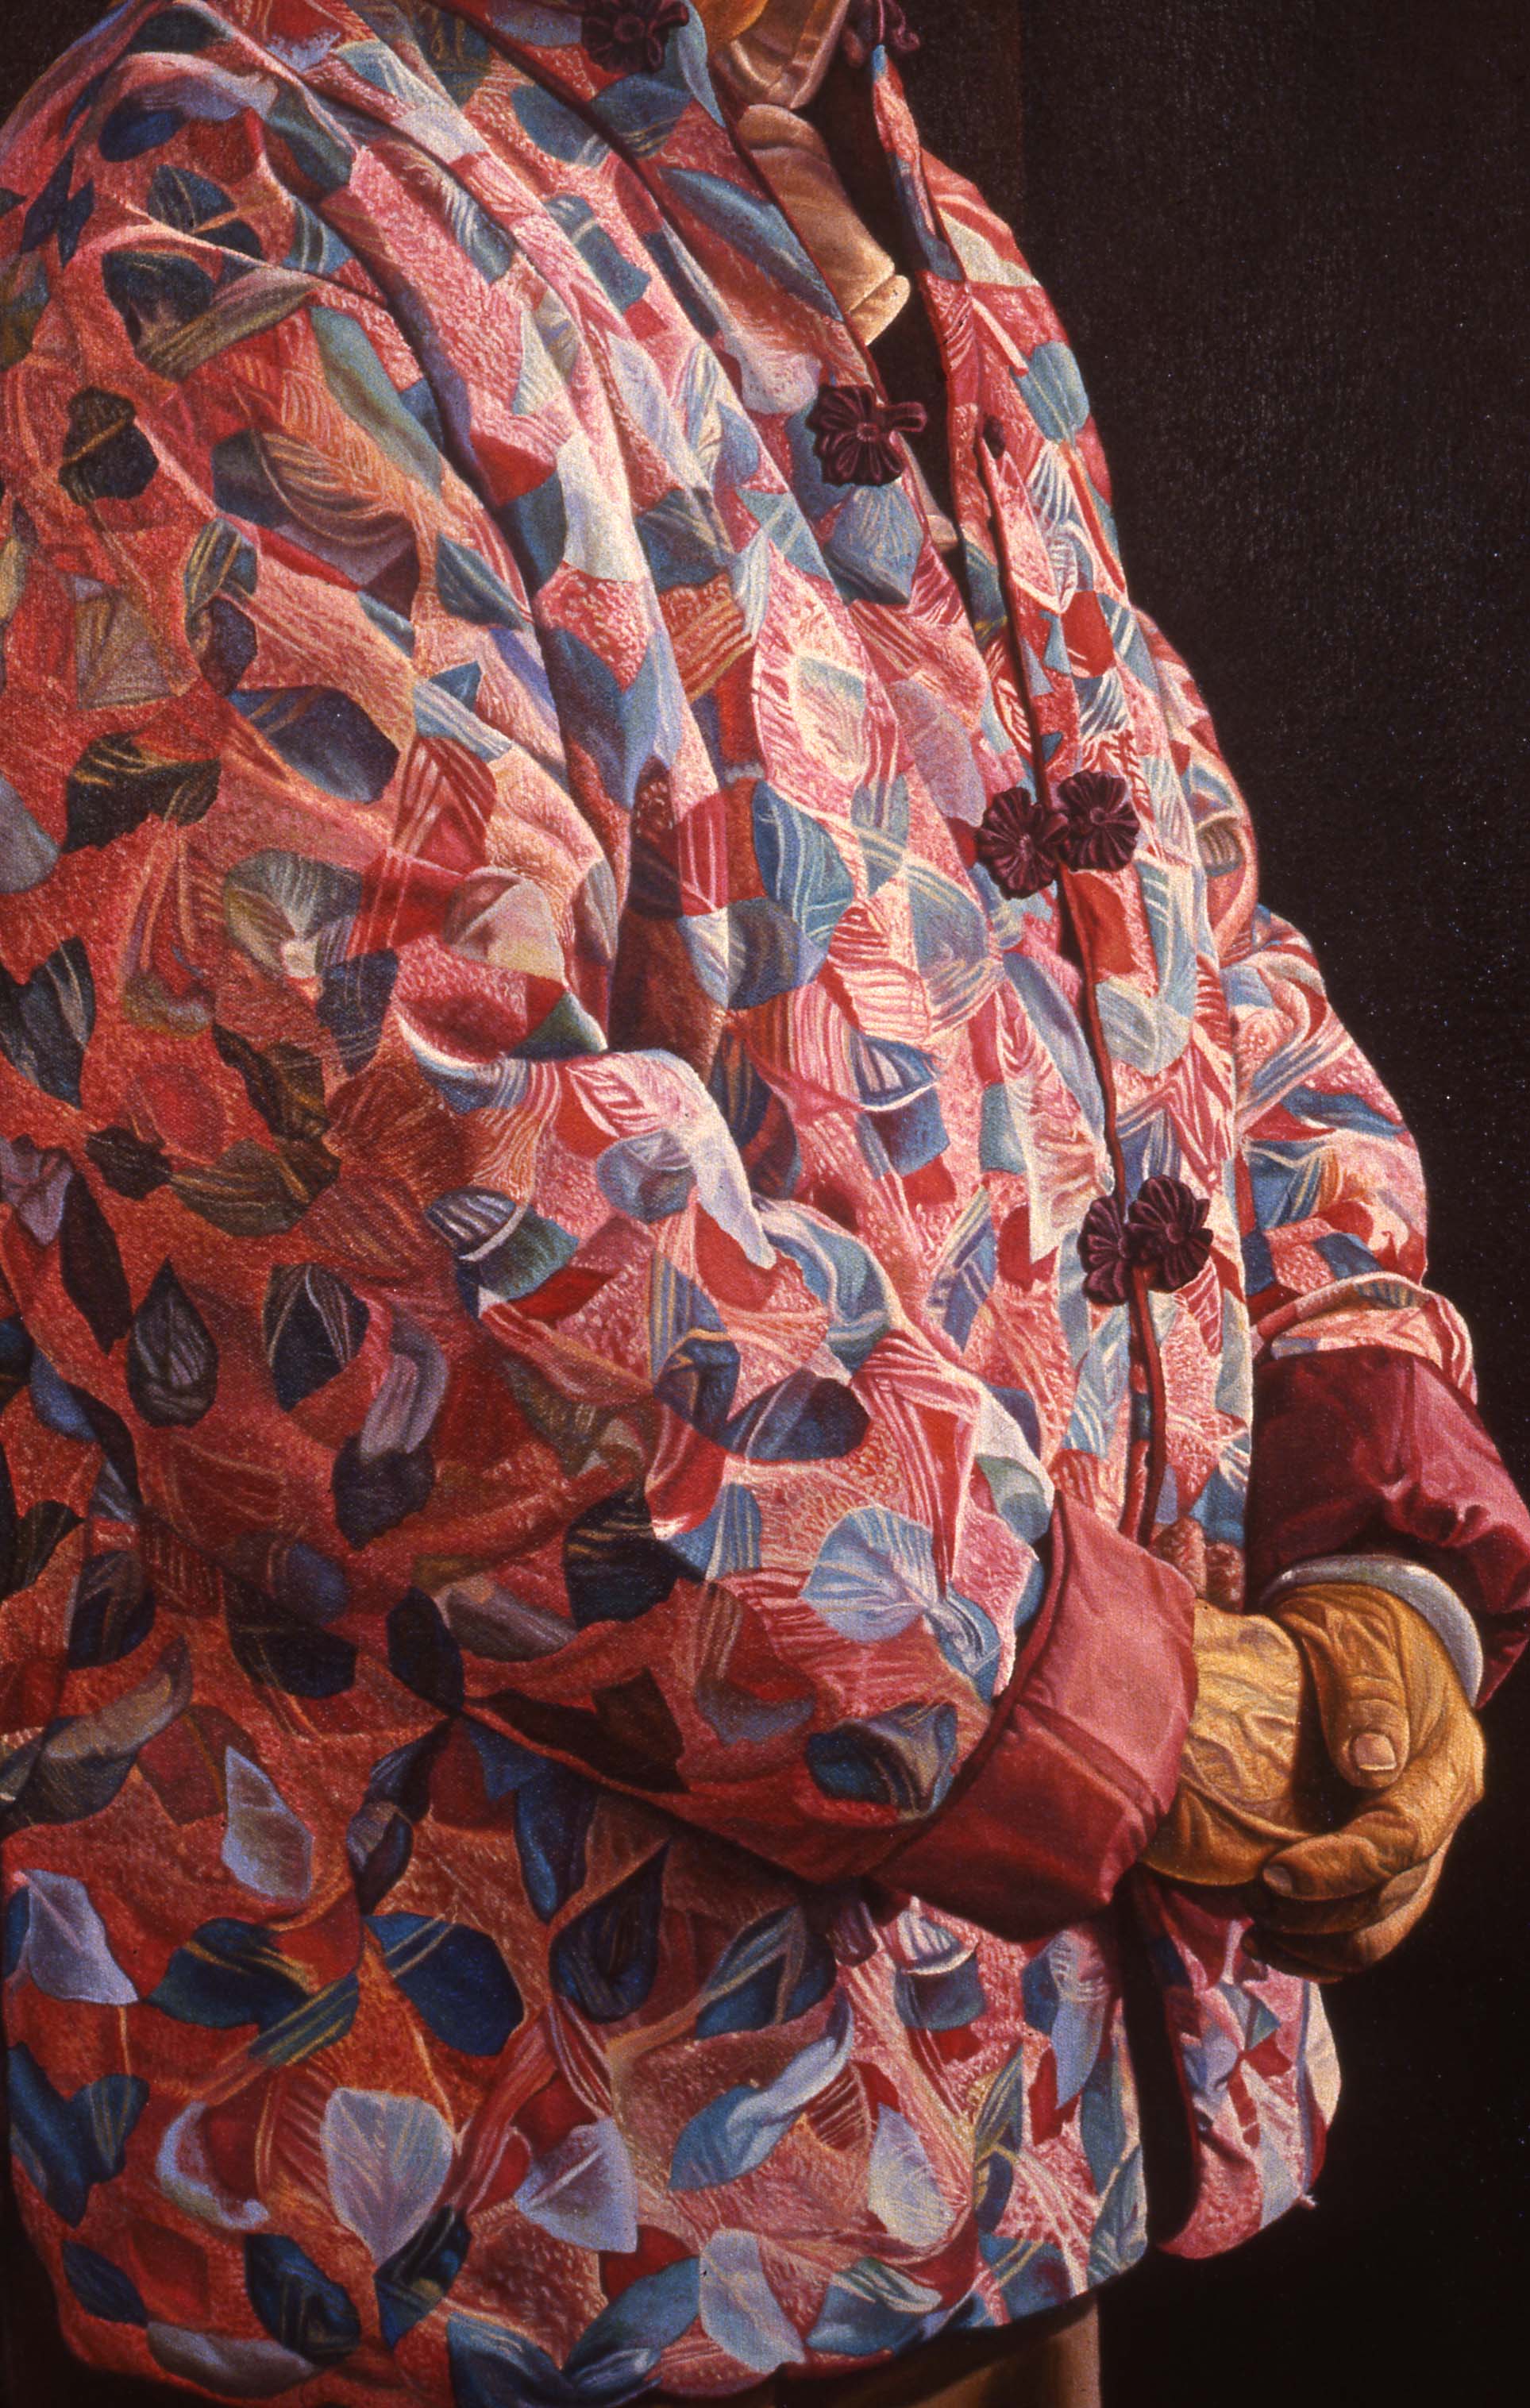   “Things Which Are Seen Are Temporal”, Detail    1988 Oil on canvas   72 x 48 inches   © Richard Wyatt Jr.  